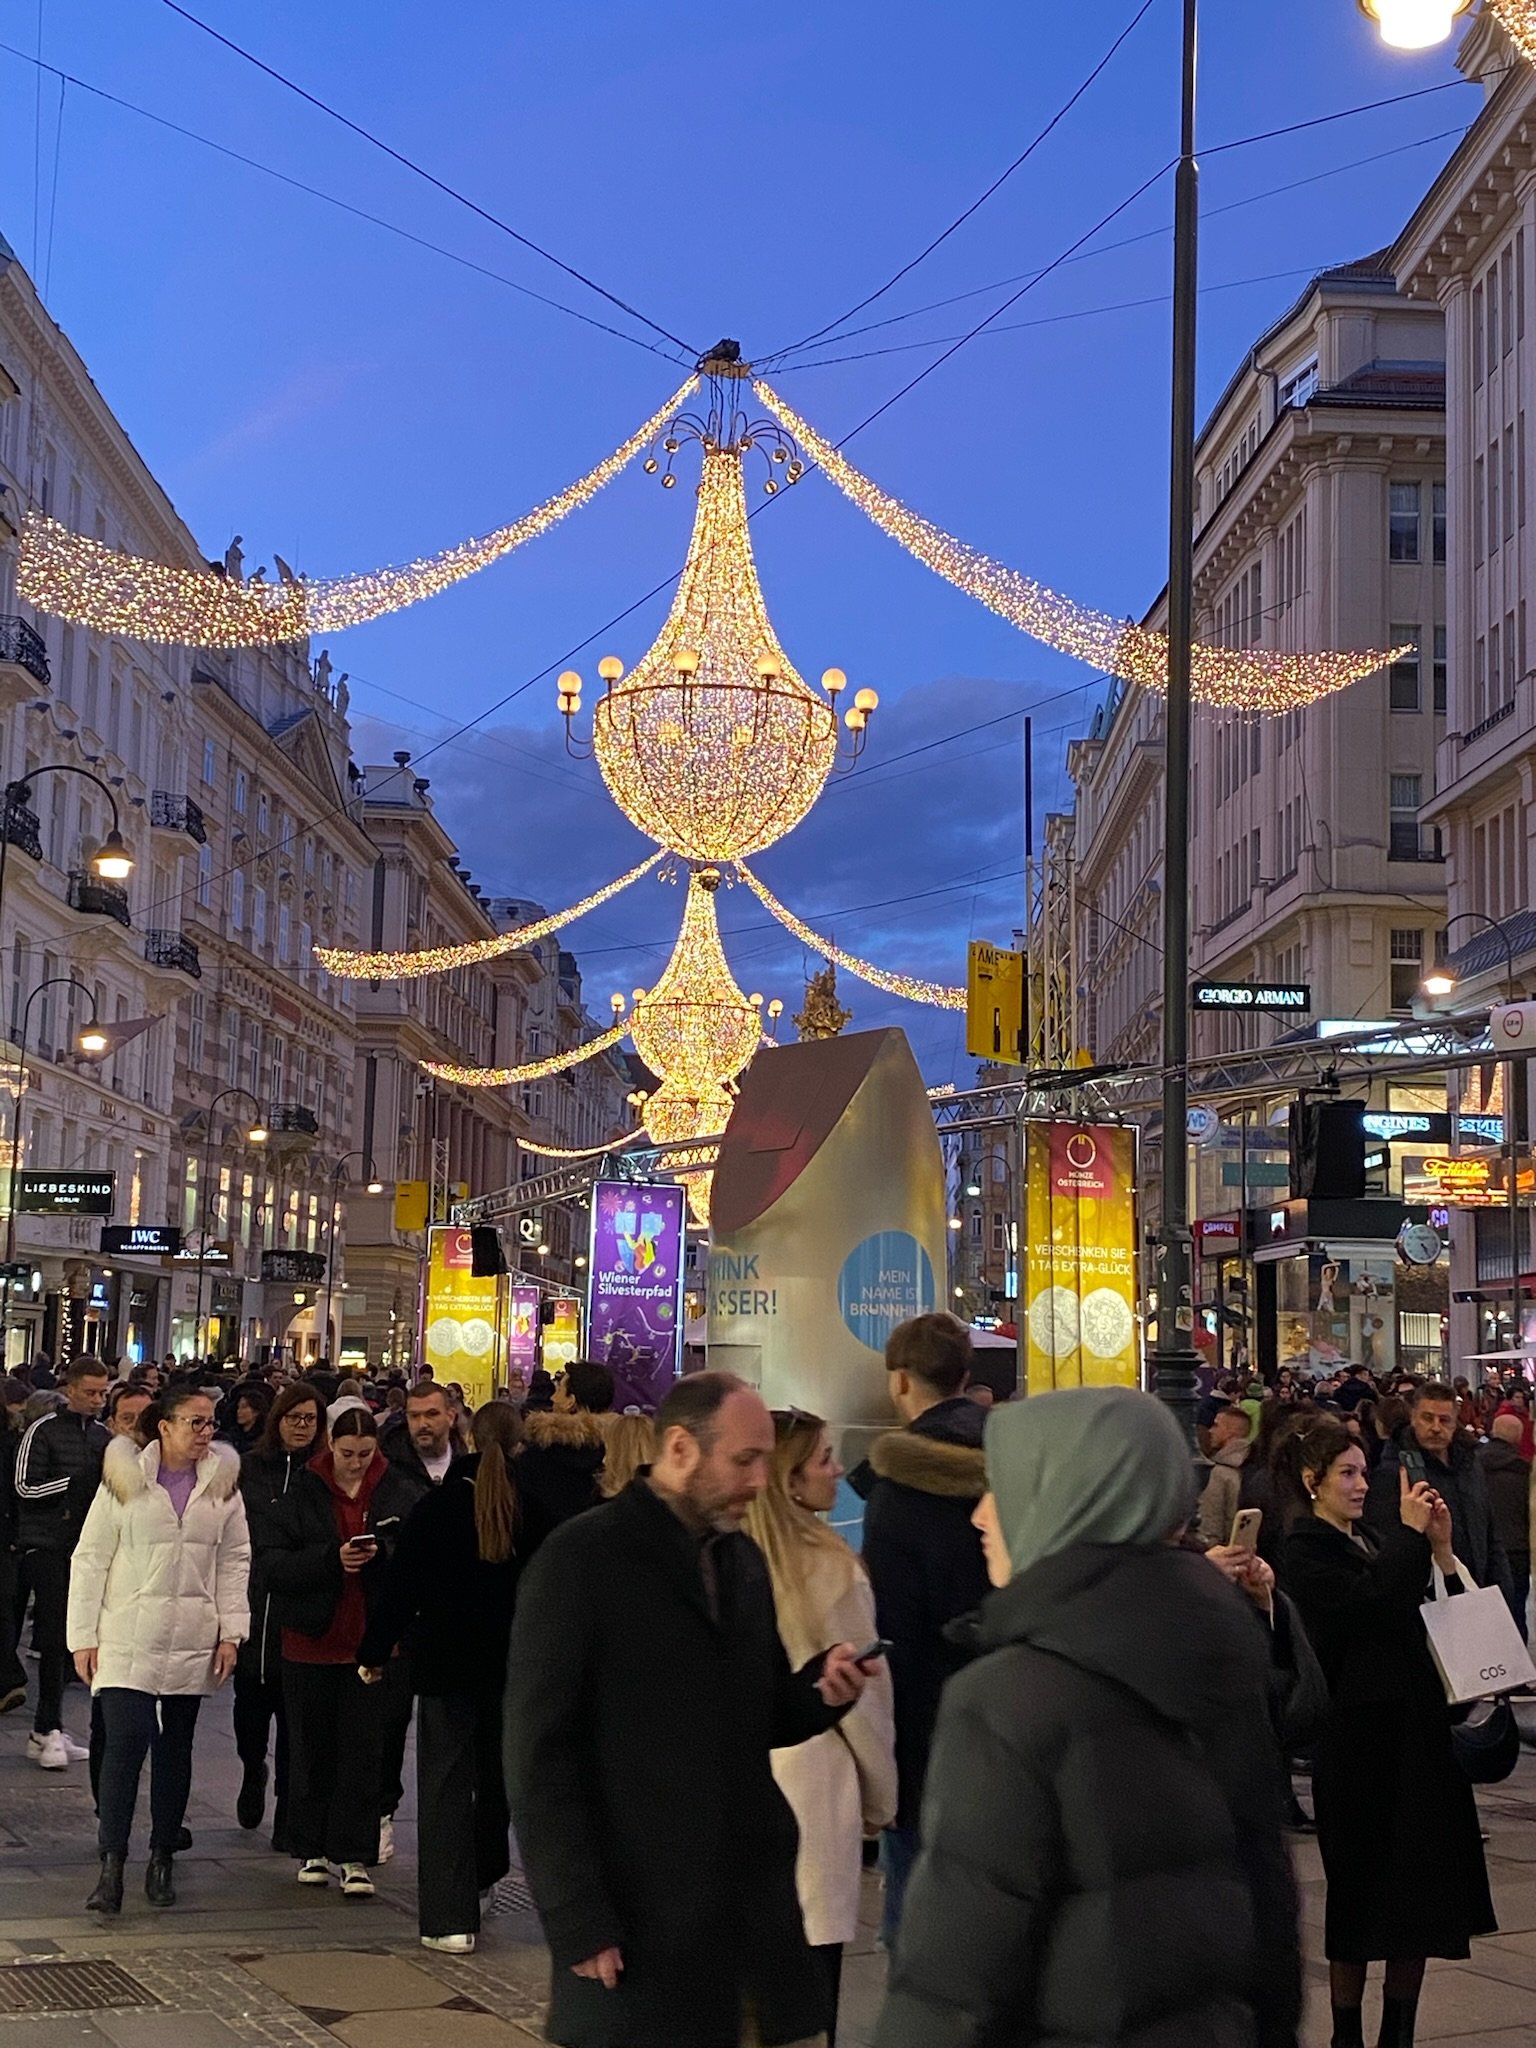 Vienna for New Year's